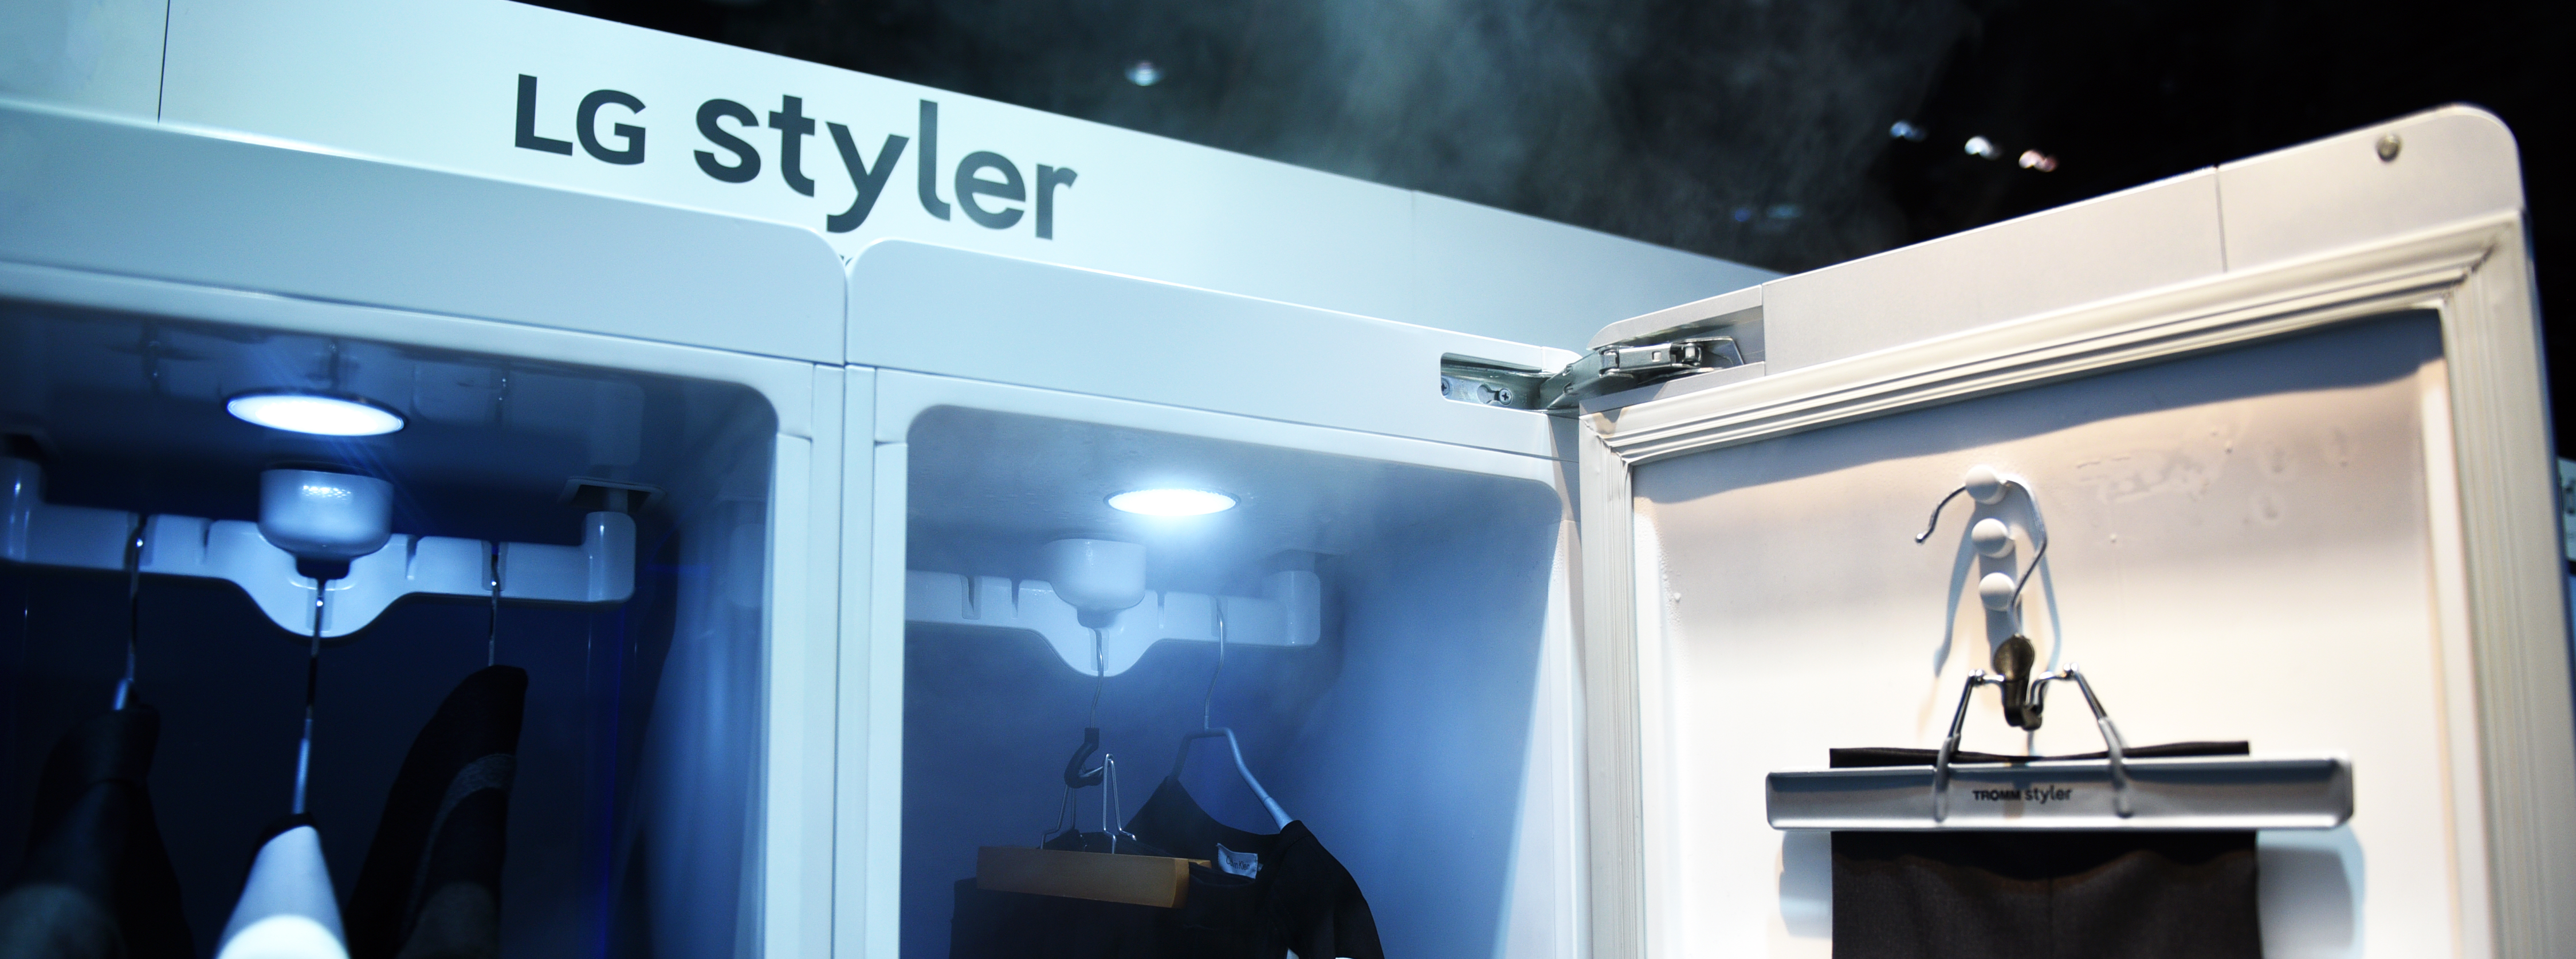 New LG Styler Steam Closet Will Keep You Looking Good Laundry